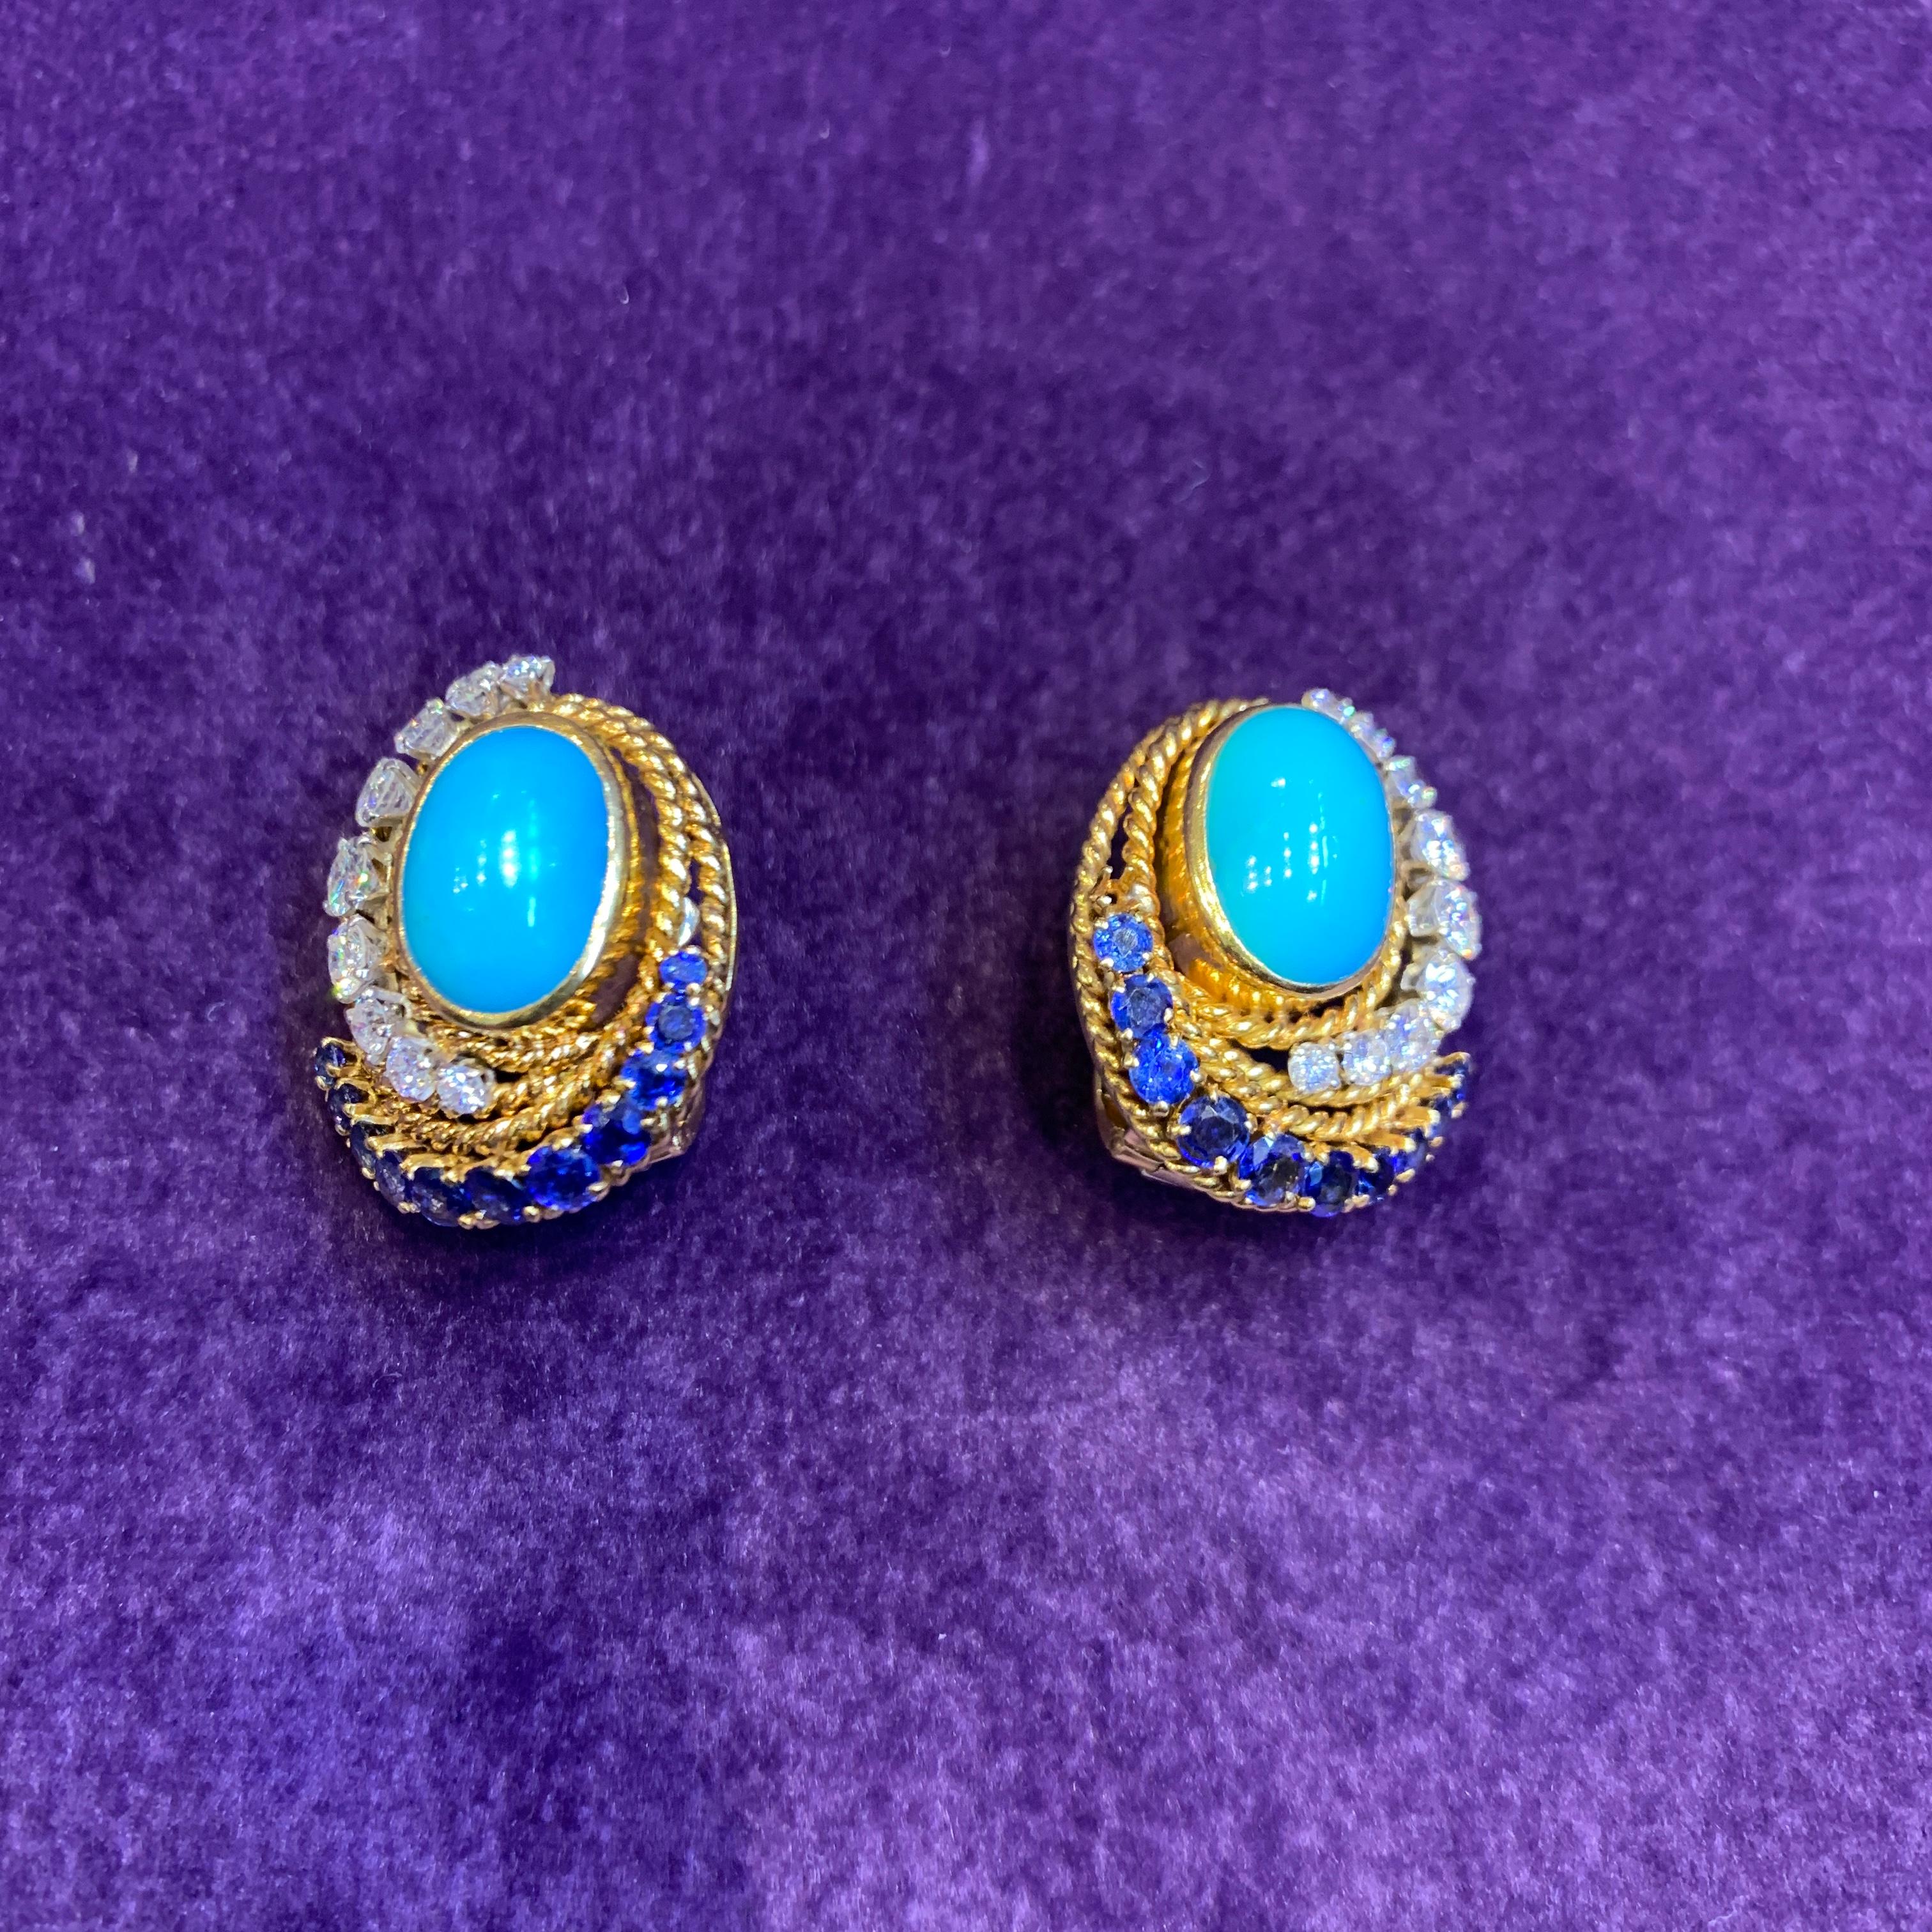 Van Cleef & Arpels Turquoise Sapphire & Diamond Earrings In Excellent Condition For Sale In New York, NY